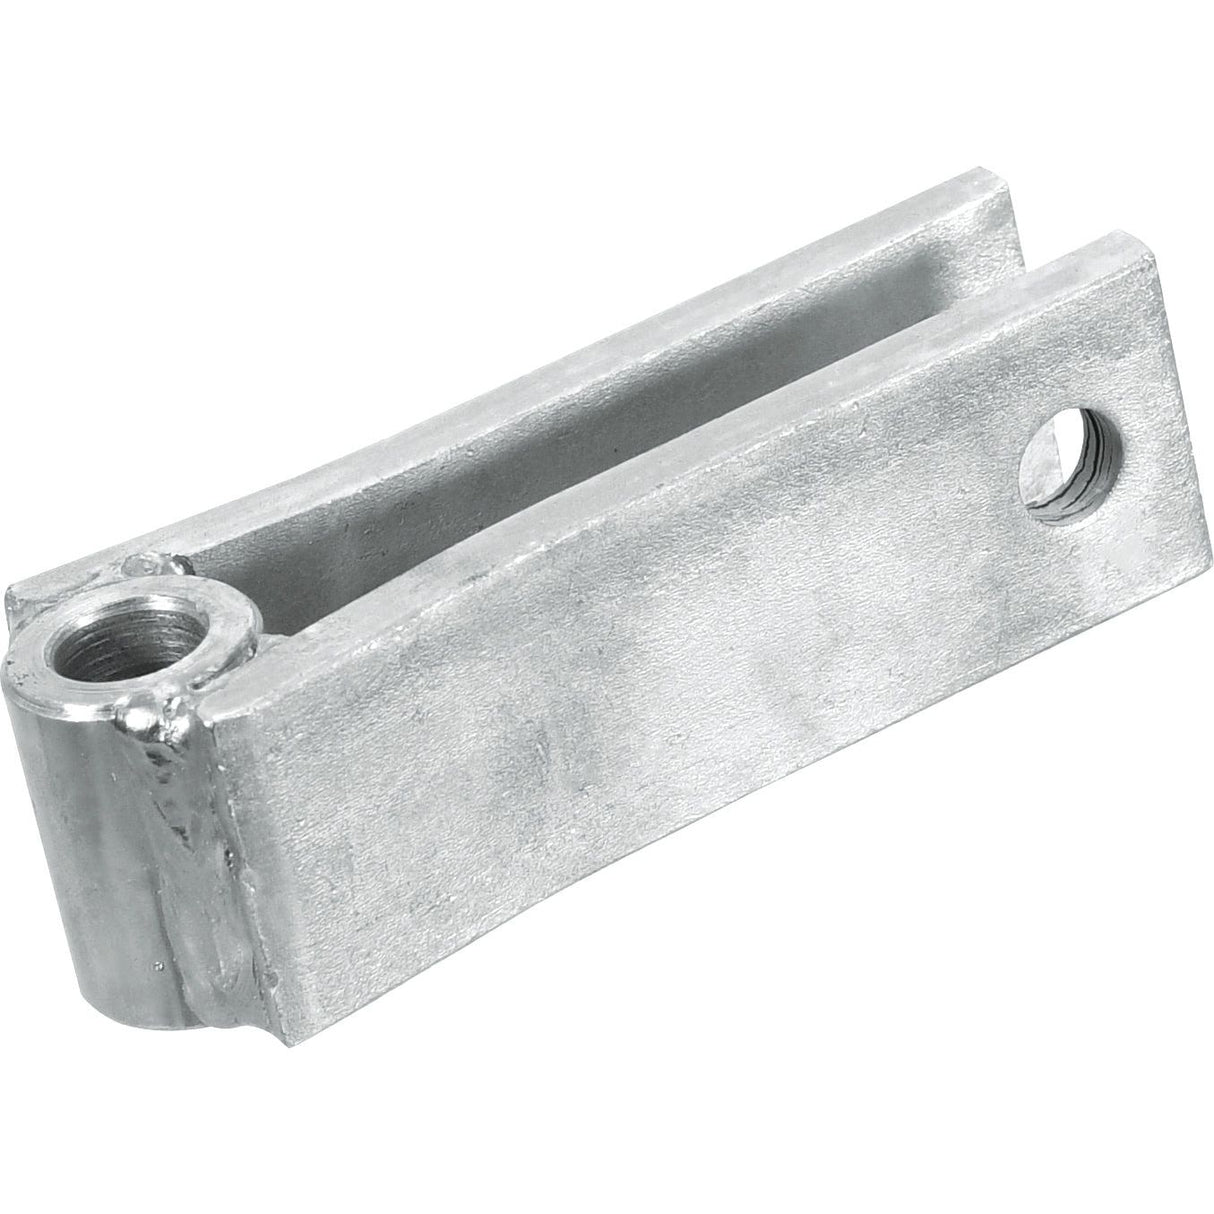 Lift Arm Tapered Clevis Bracket - tapered
 - S.70765 - Massey Tractor Parts